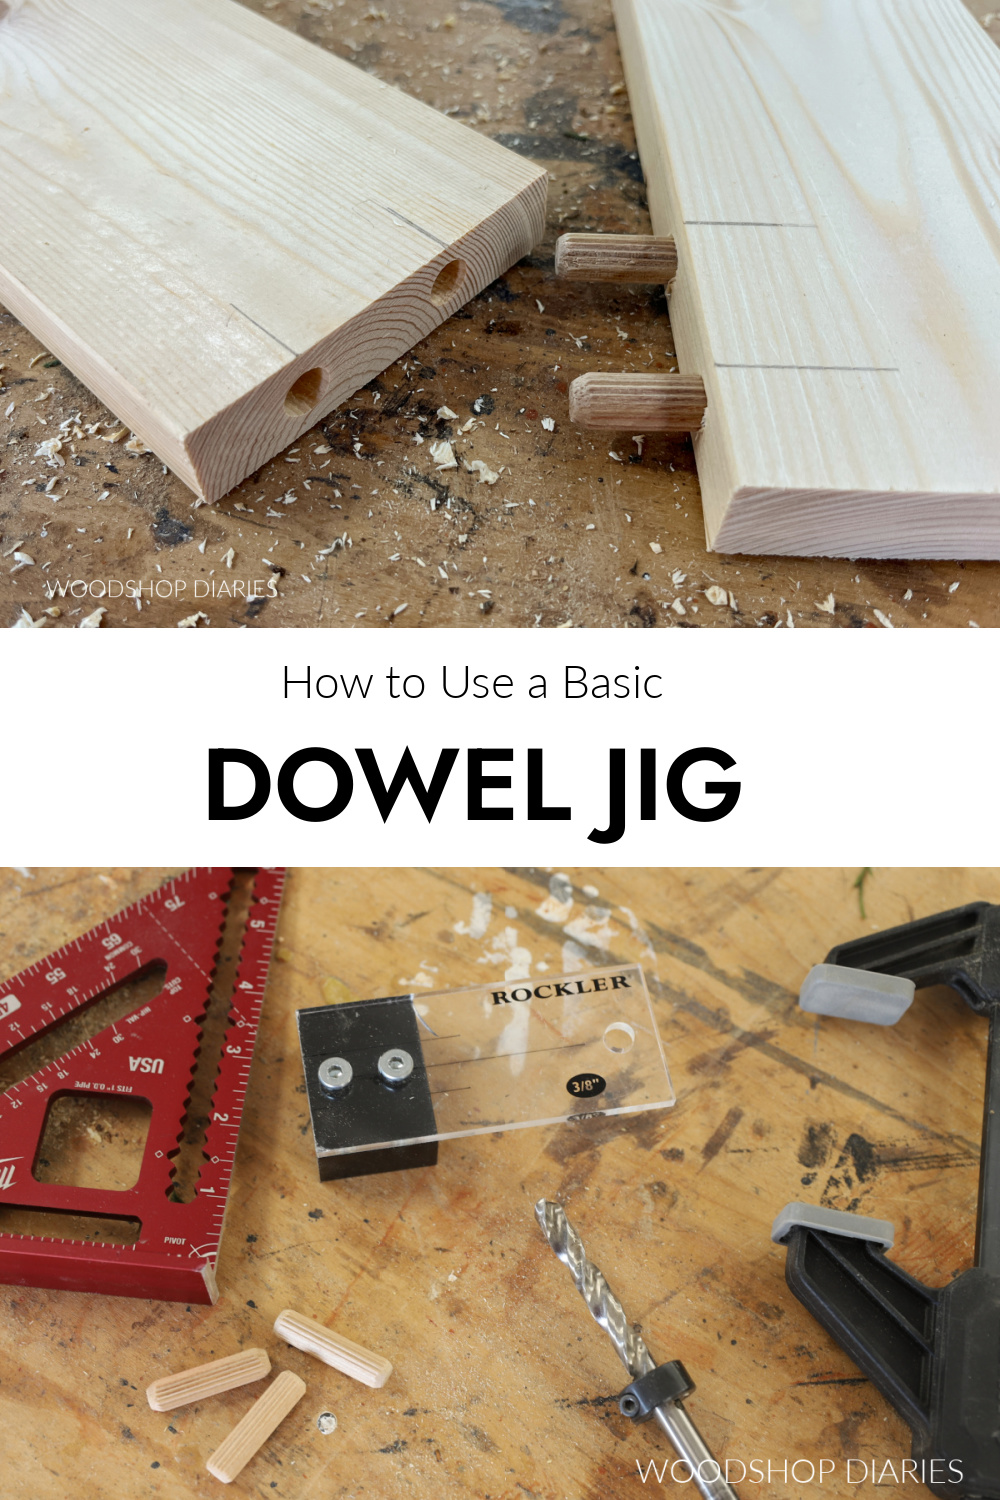 Pinterest collage image showing two boards with dowel holes drilled at top and dowel jig on workbench at bottom with text "how to use a basic dowel jig"